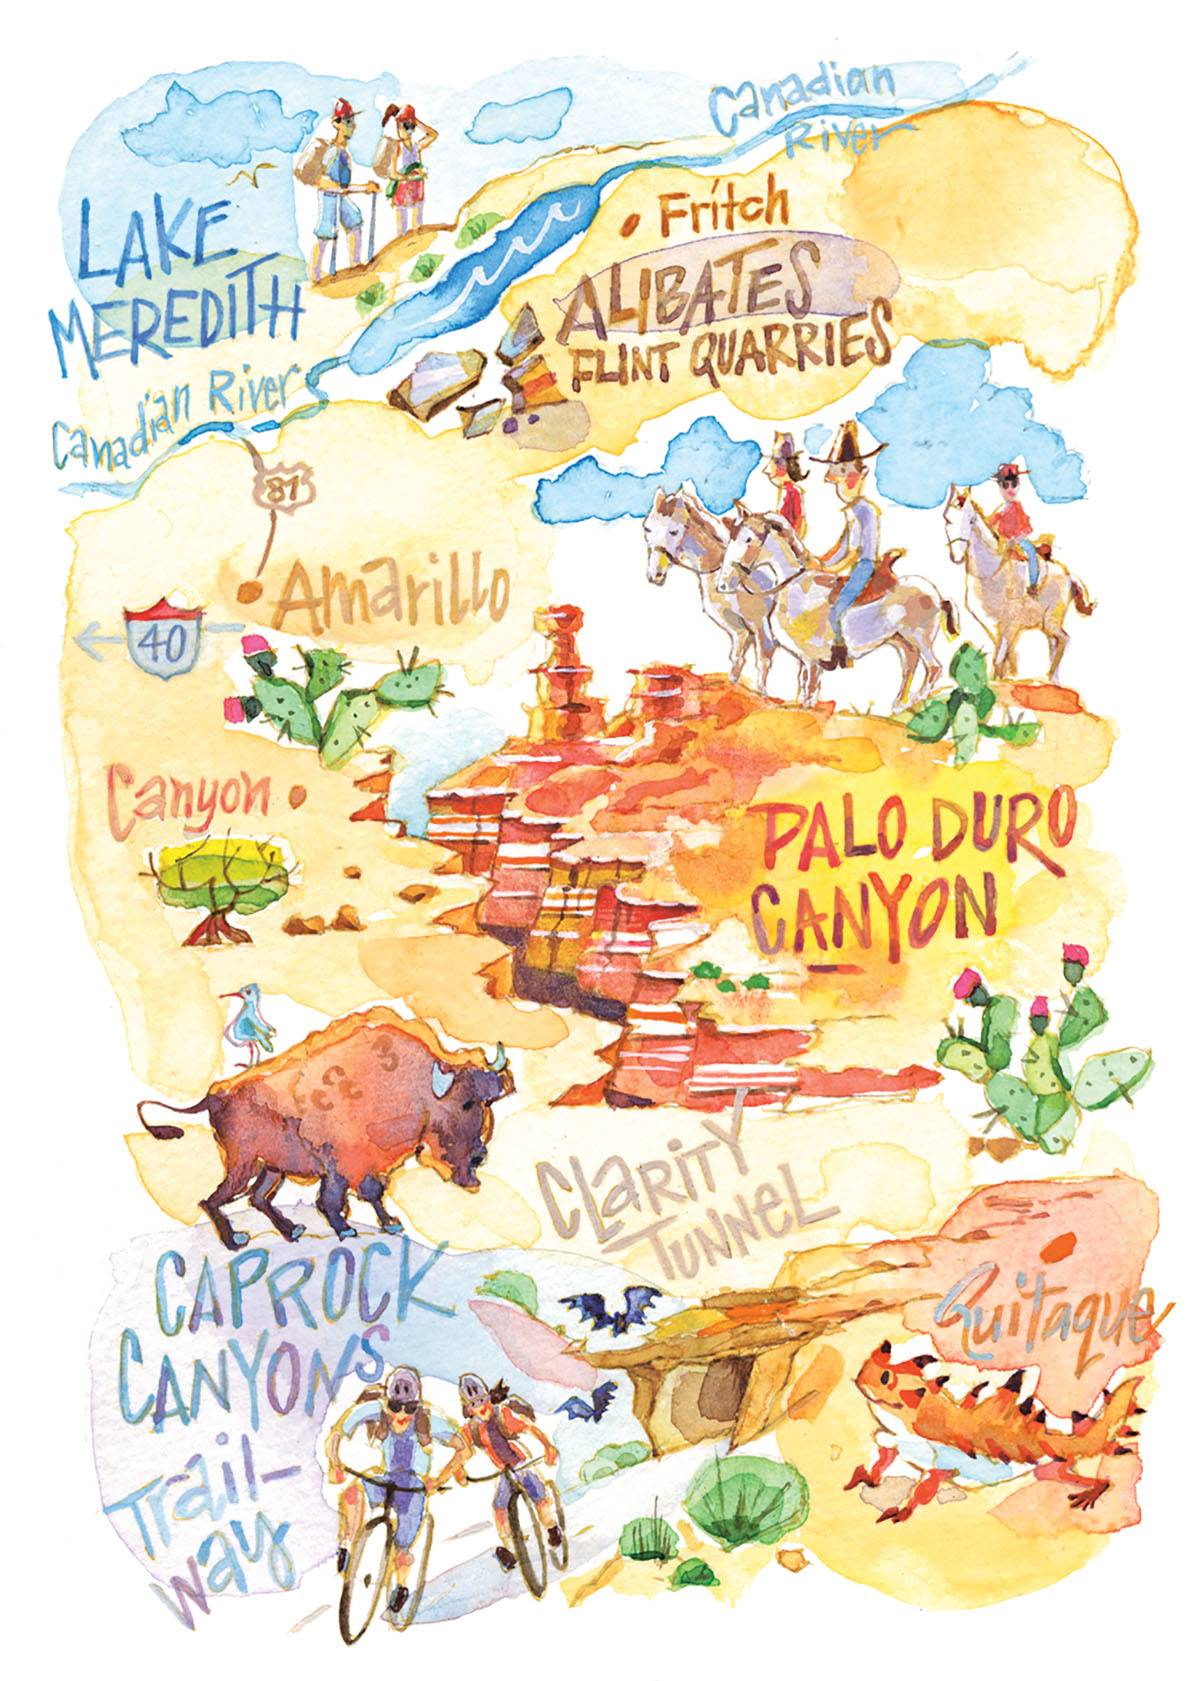 An illustrated map showing the areas of the journey_ Lake Meridth and the Canadian River, Flint Quarries, Amarillo, Palo Duro Canyon, Caprock Canyons, Clarity Tunnel, Quitaque